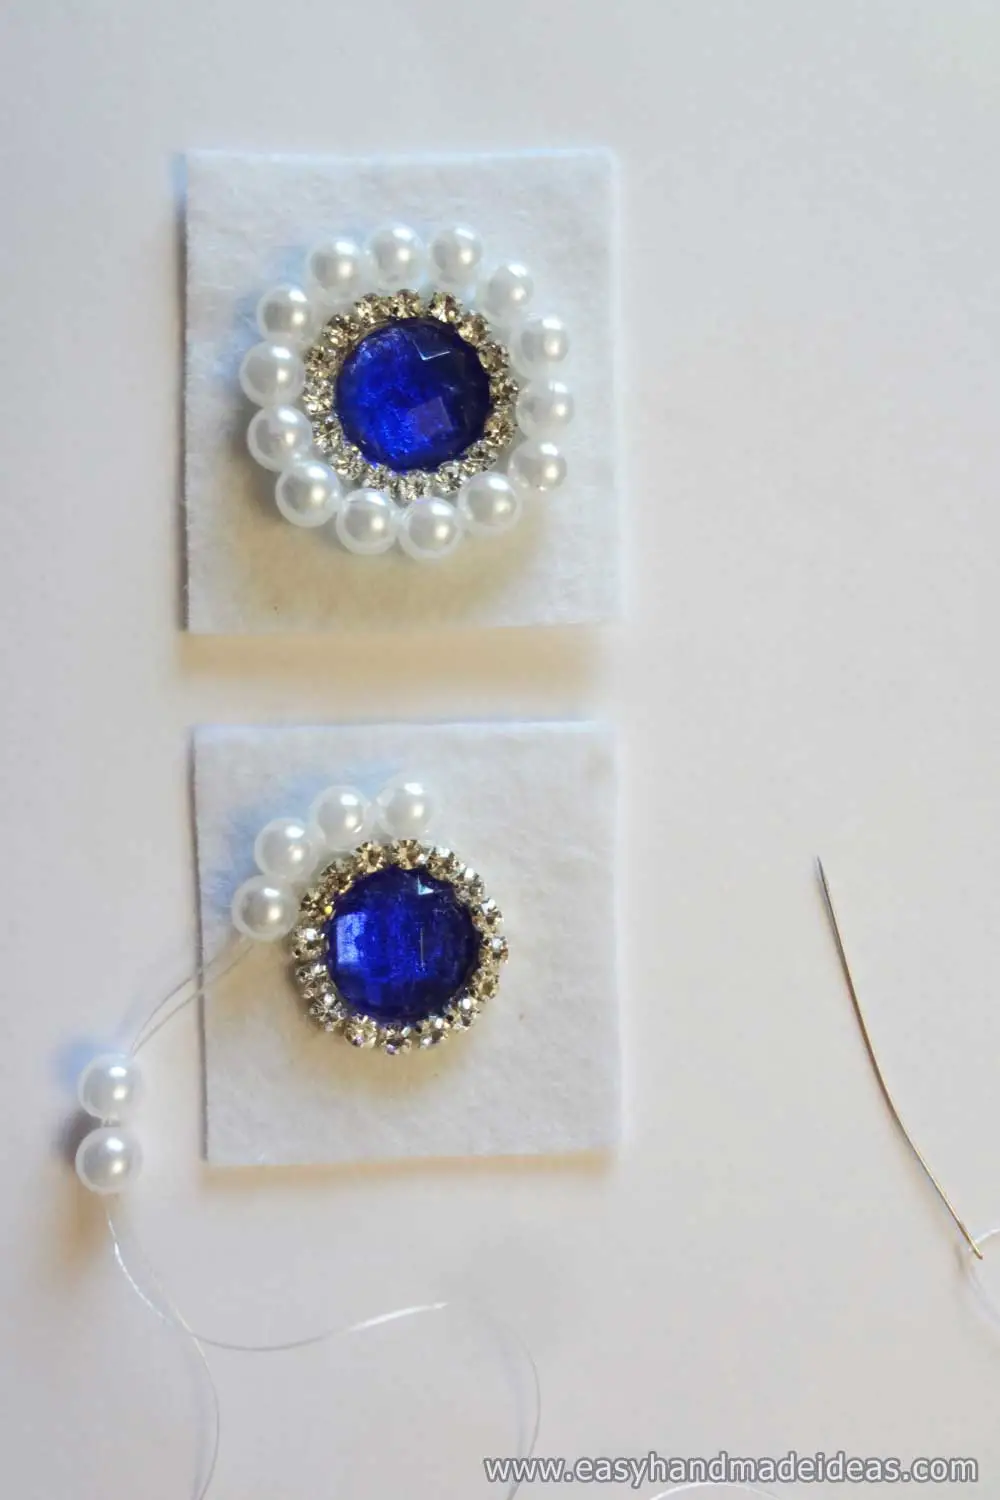 Sewing White Beads to the Core